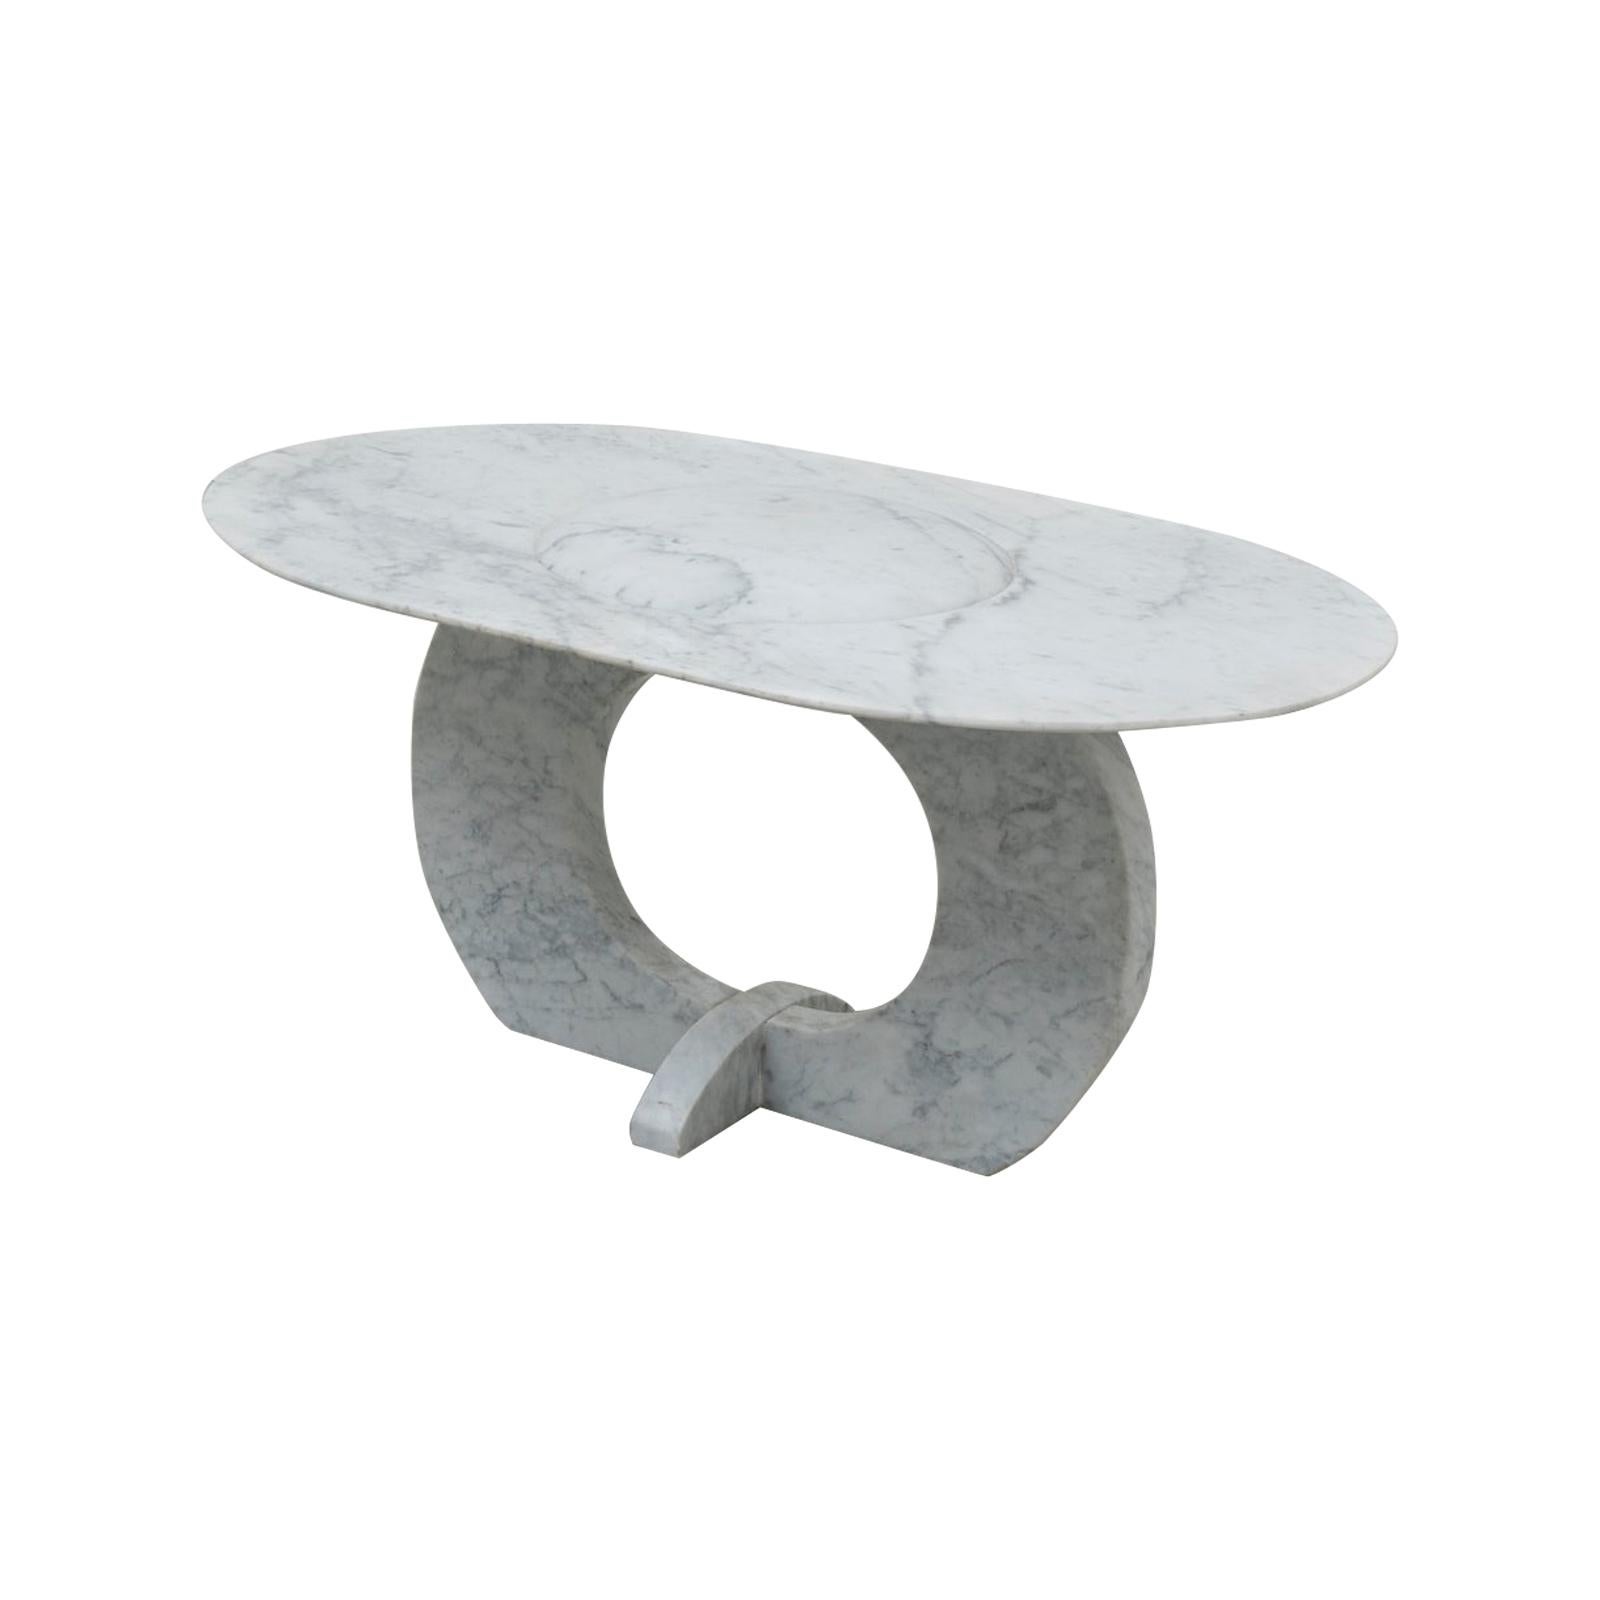 Will West Contemporary Unique Solid Carrara Marble Coffee Table For Sale